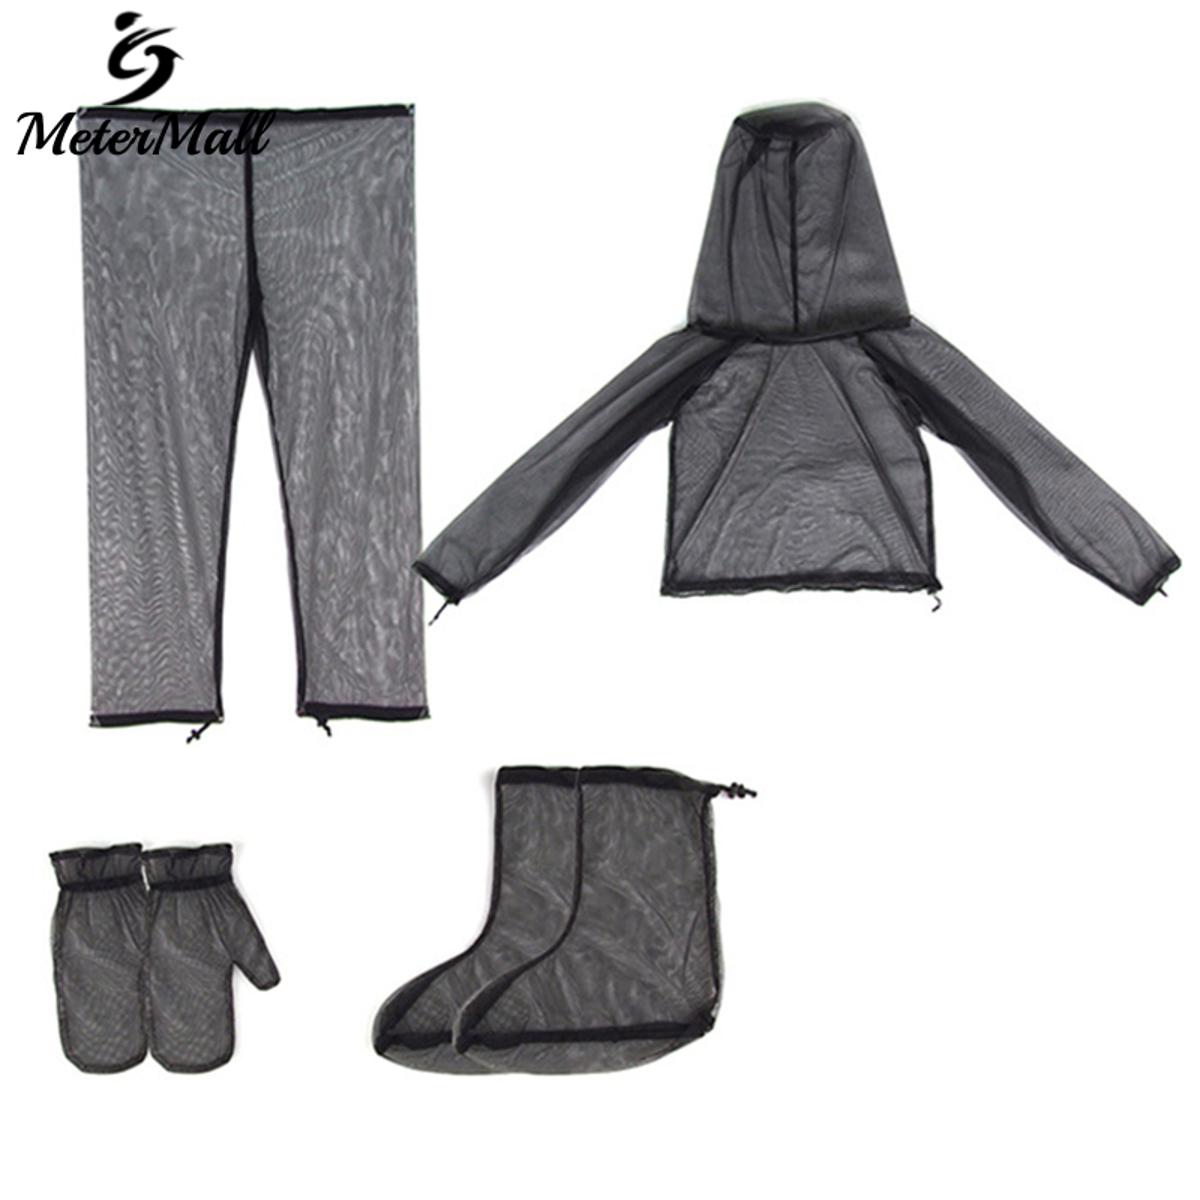 MeterMall Outdoor Camping Anti-mosquito Clothes Breathable Adjustable Size  Summer Fishing Mesh Clothes Pants Four-piece